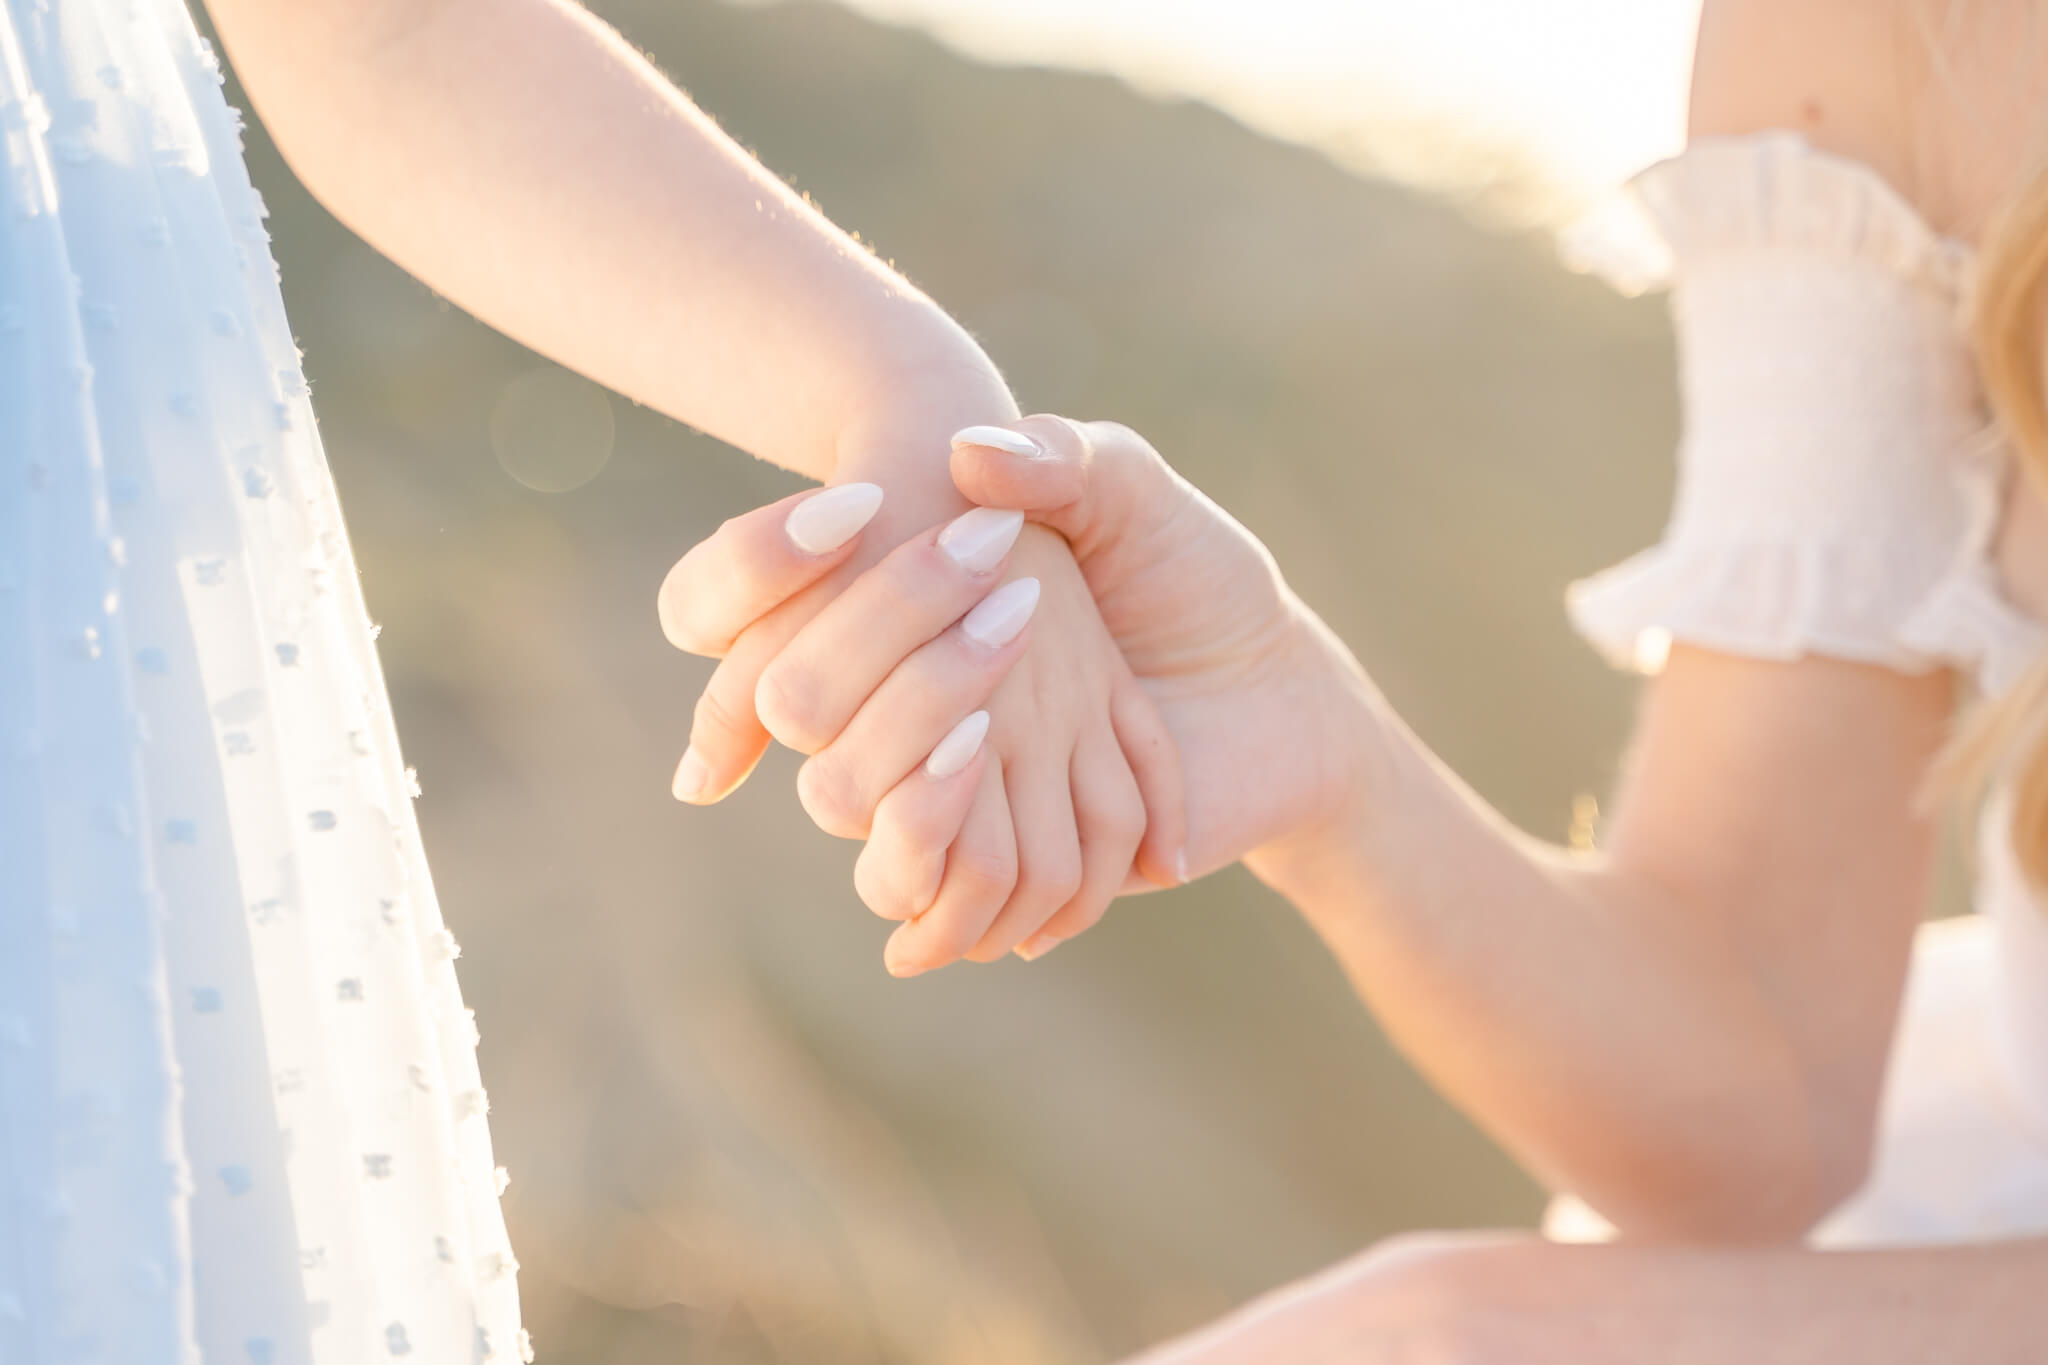 Mom wearing white with white nails holding hands with young daughter in blue dress. Close up photo of hands